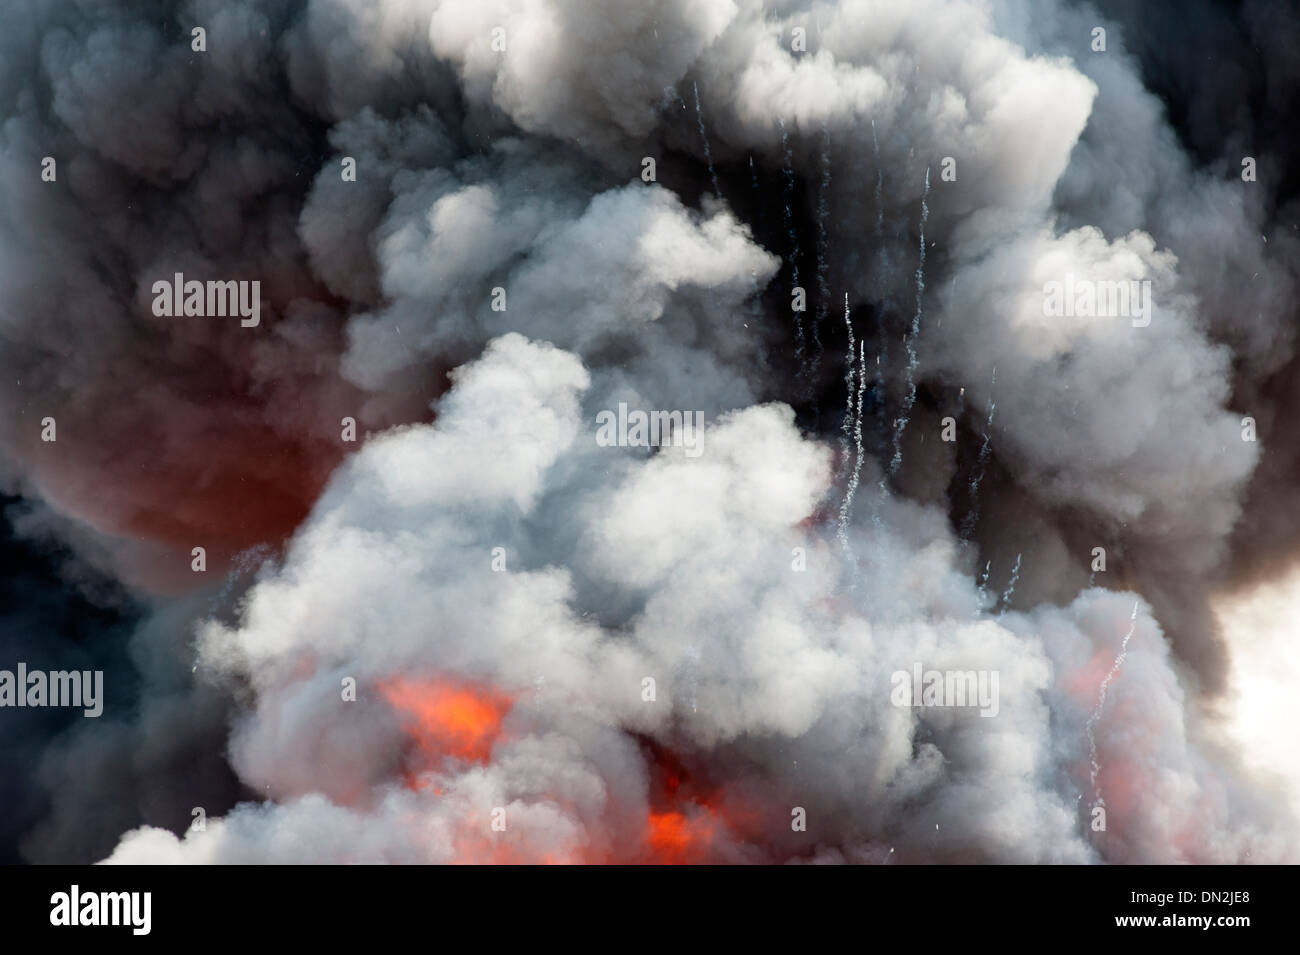 Aerosol cannisters exploding in large fire smoke Stock Photo